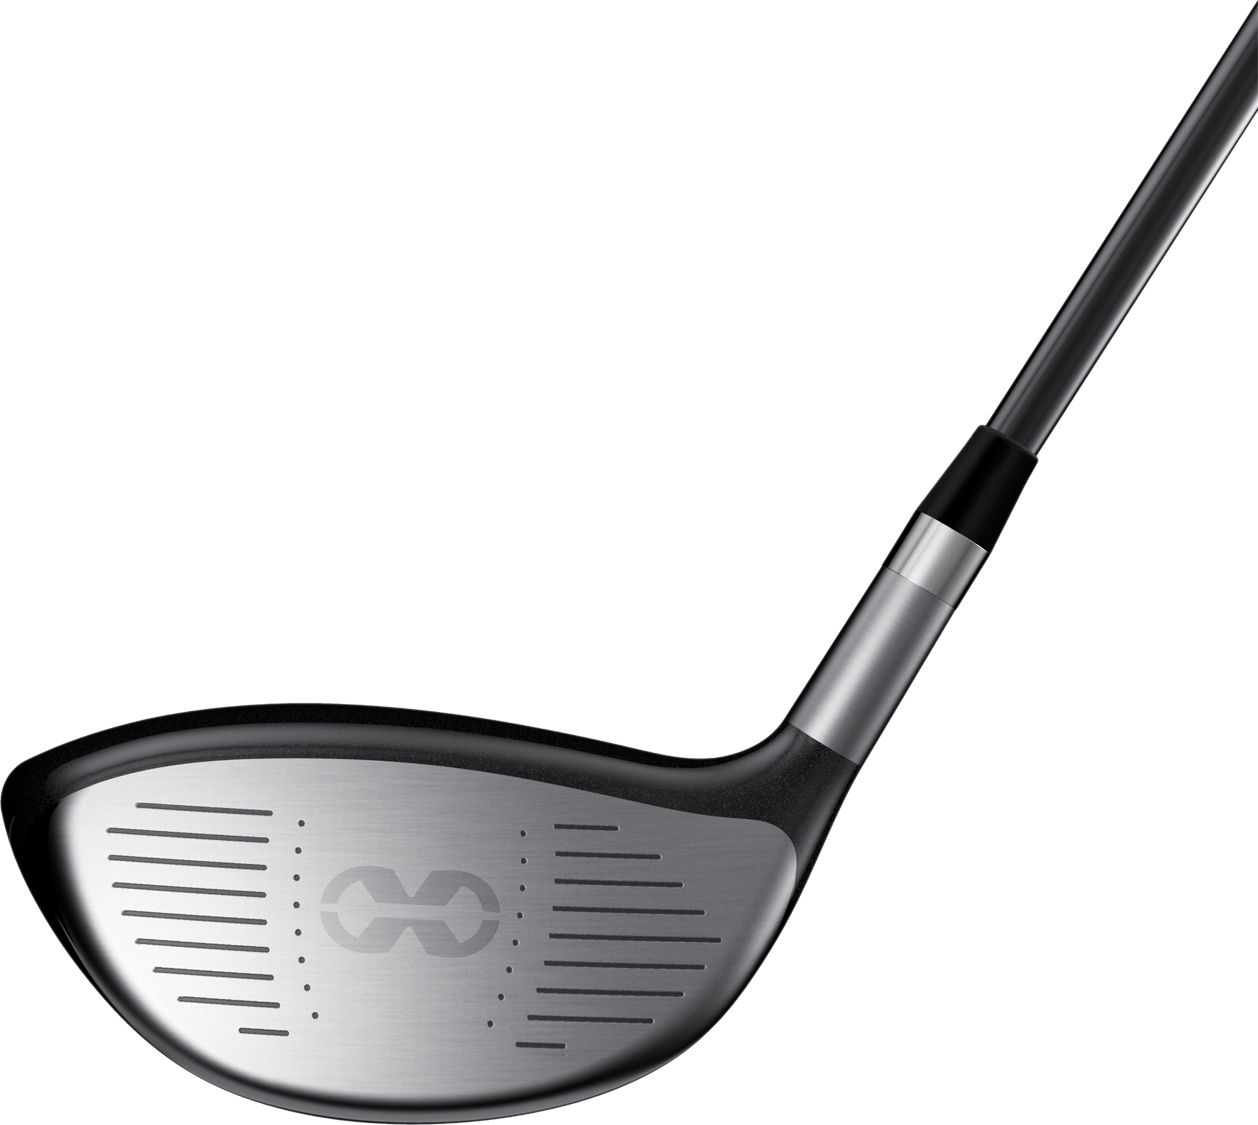 Nike Golf VR Pro Limited Edition Driver and Fairway Wood: In-hand ...